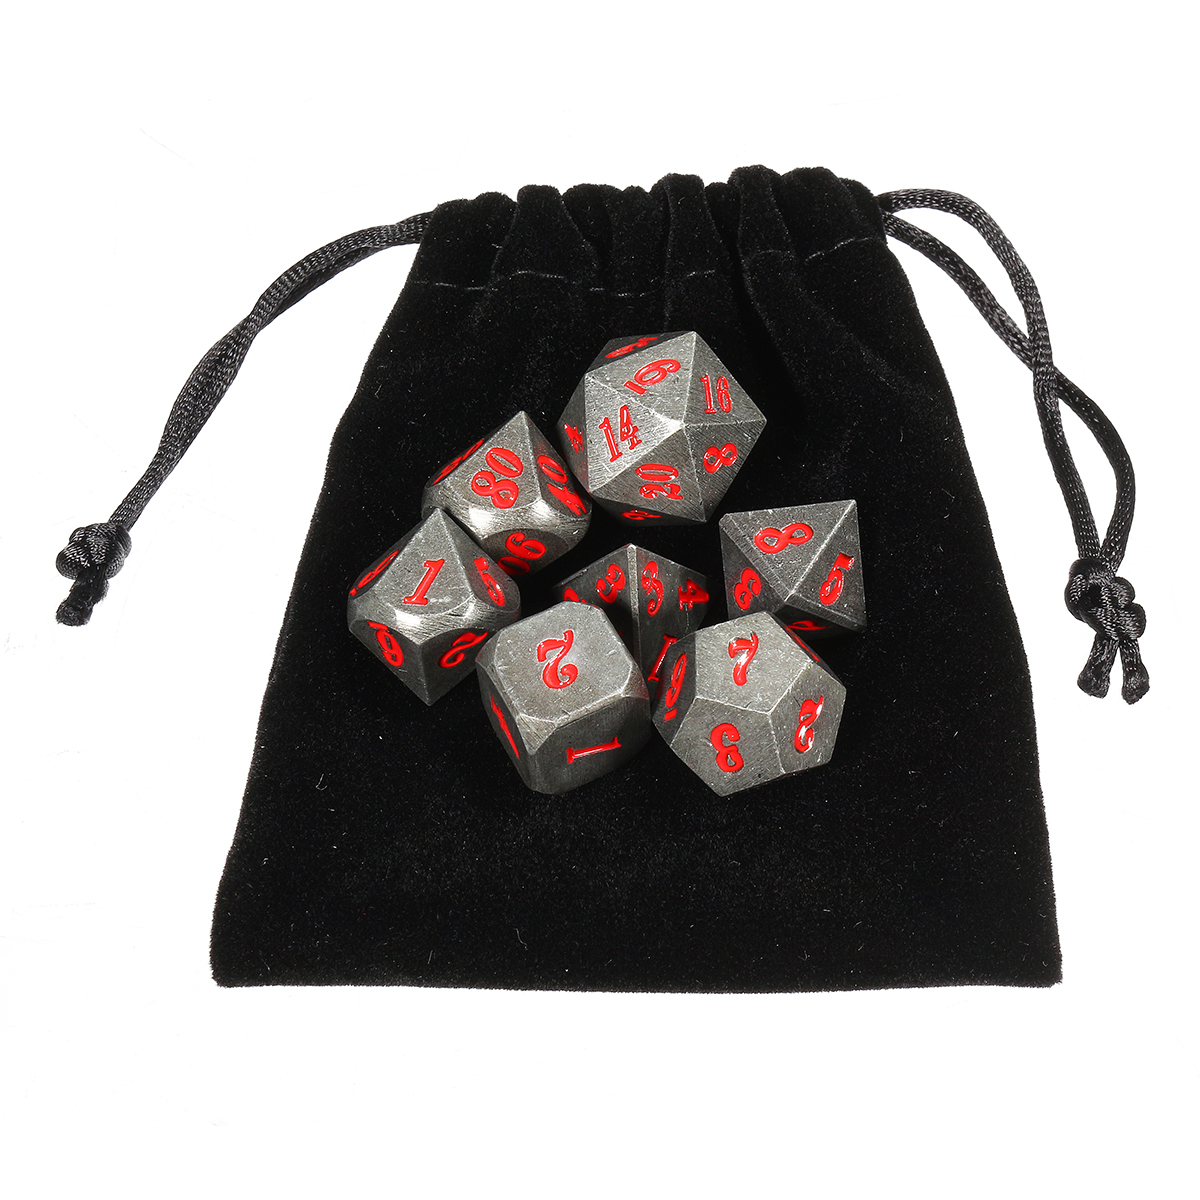 Antique-Metal-7-Pcs-Multisided-Dice-Heavy-Metal-Polyhedral-Dices-Set-w-Bag-1292360-6